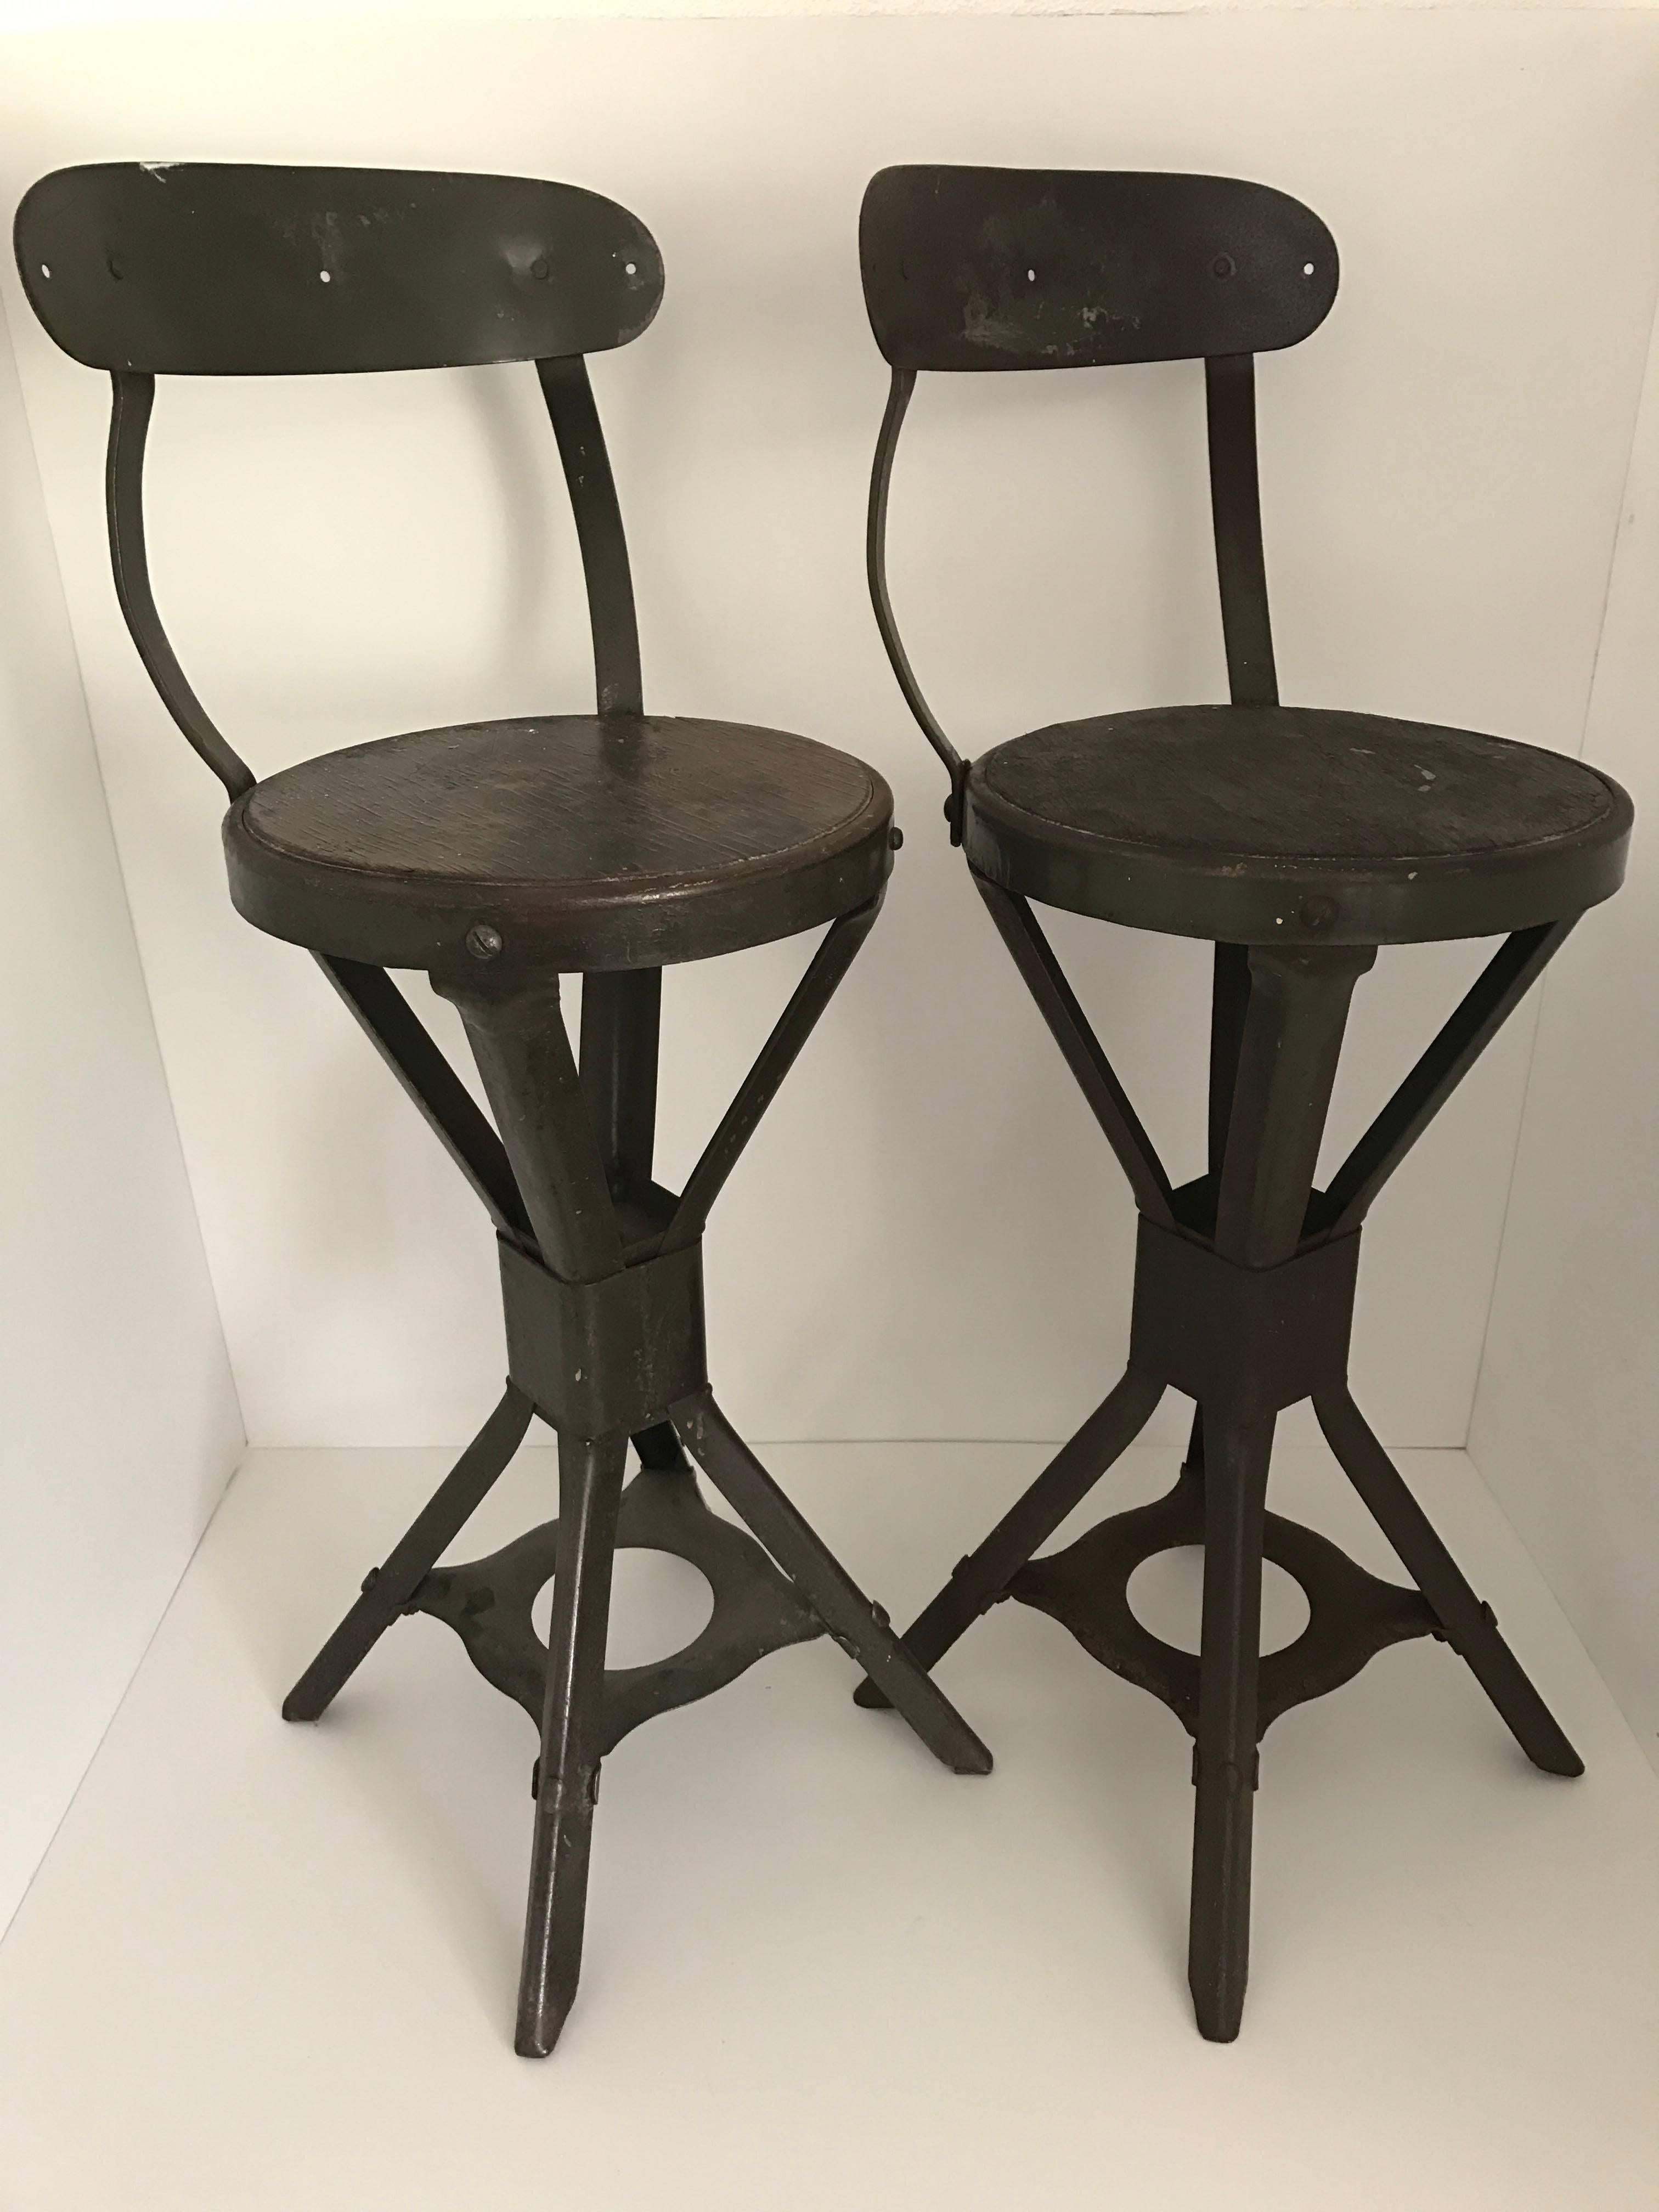 1940 pair of Evertaut workshop chairs. One has some rusty patina but the pair is in nice condition, both are missing the padded back. The condition is otherwise very nice, no damages or repairs.
 